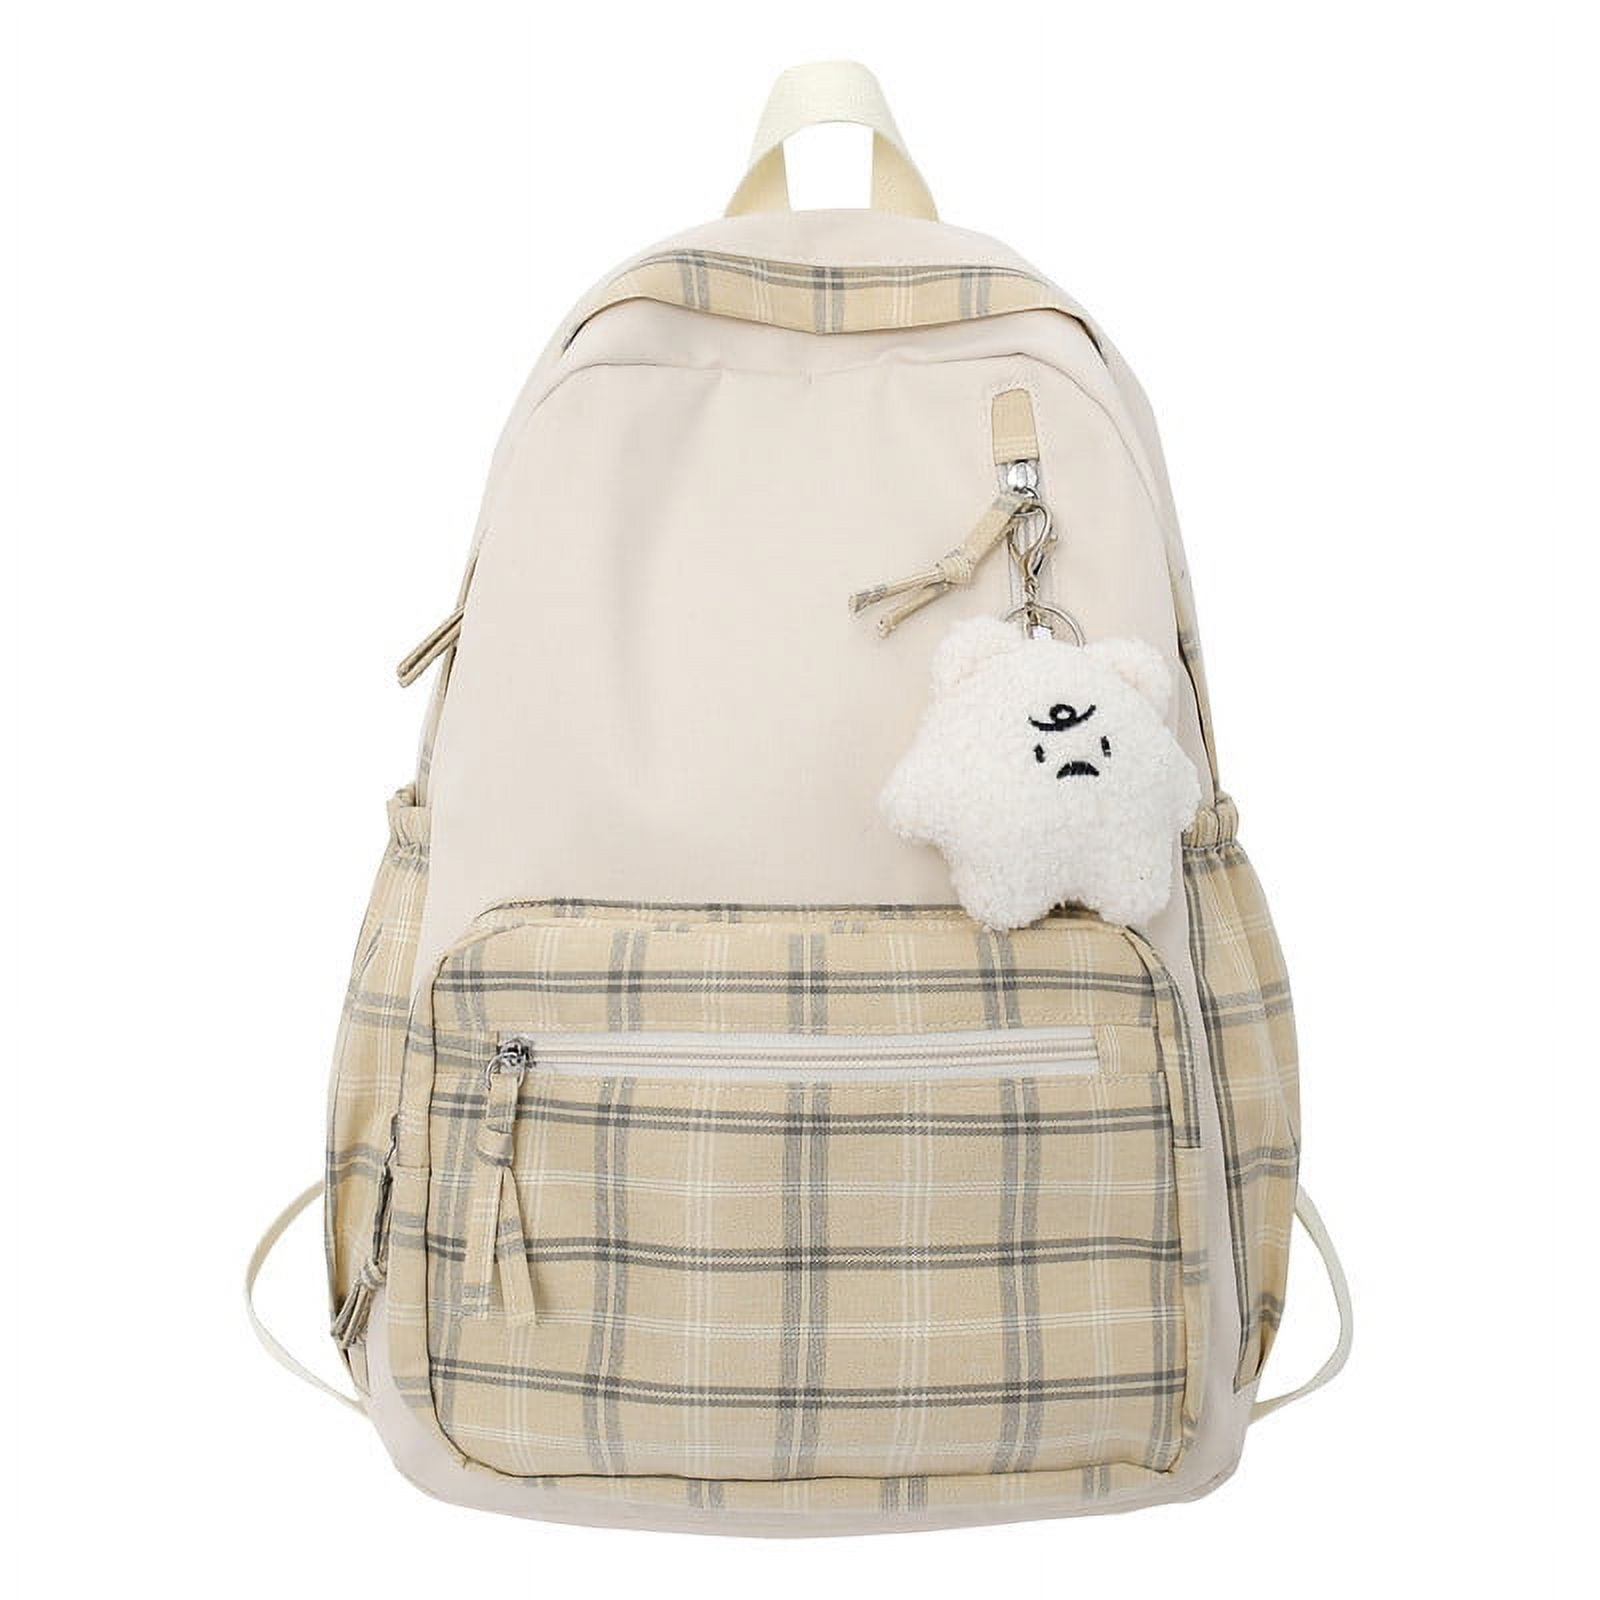 Preppy Backpack with Plushies Cute Backpack for Teen Girls Light Academia  Bookbags Solid Aesthetic School Bag (Beige) 